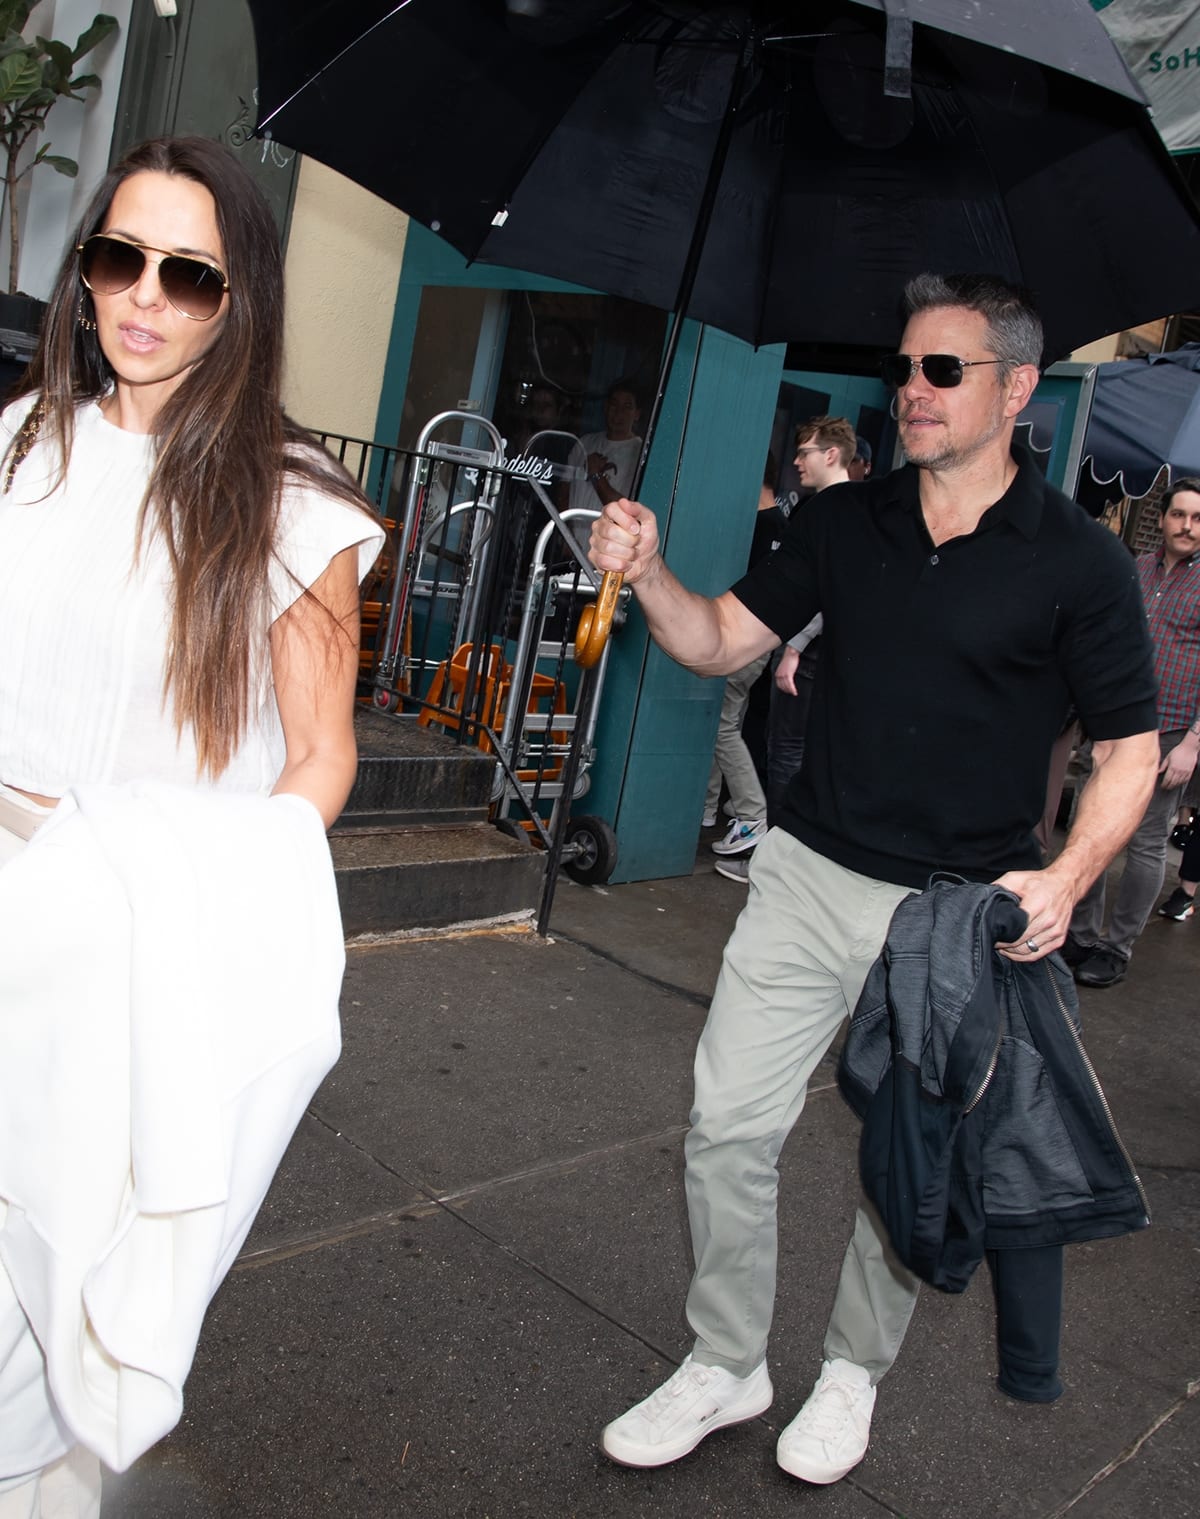 After their lunch at Sadelle's with Jennifer Lopez, Matt Damon and his wife Luciana Barroso were seen leaving the restaurant, looking content and relaxed